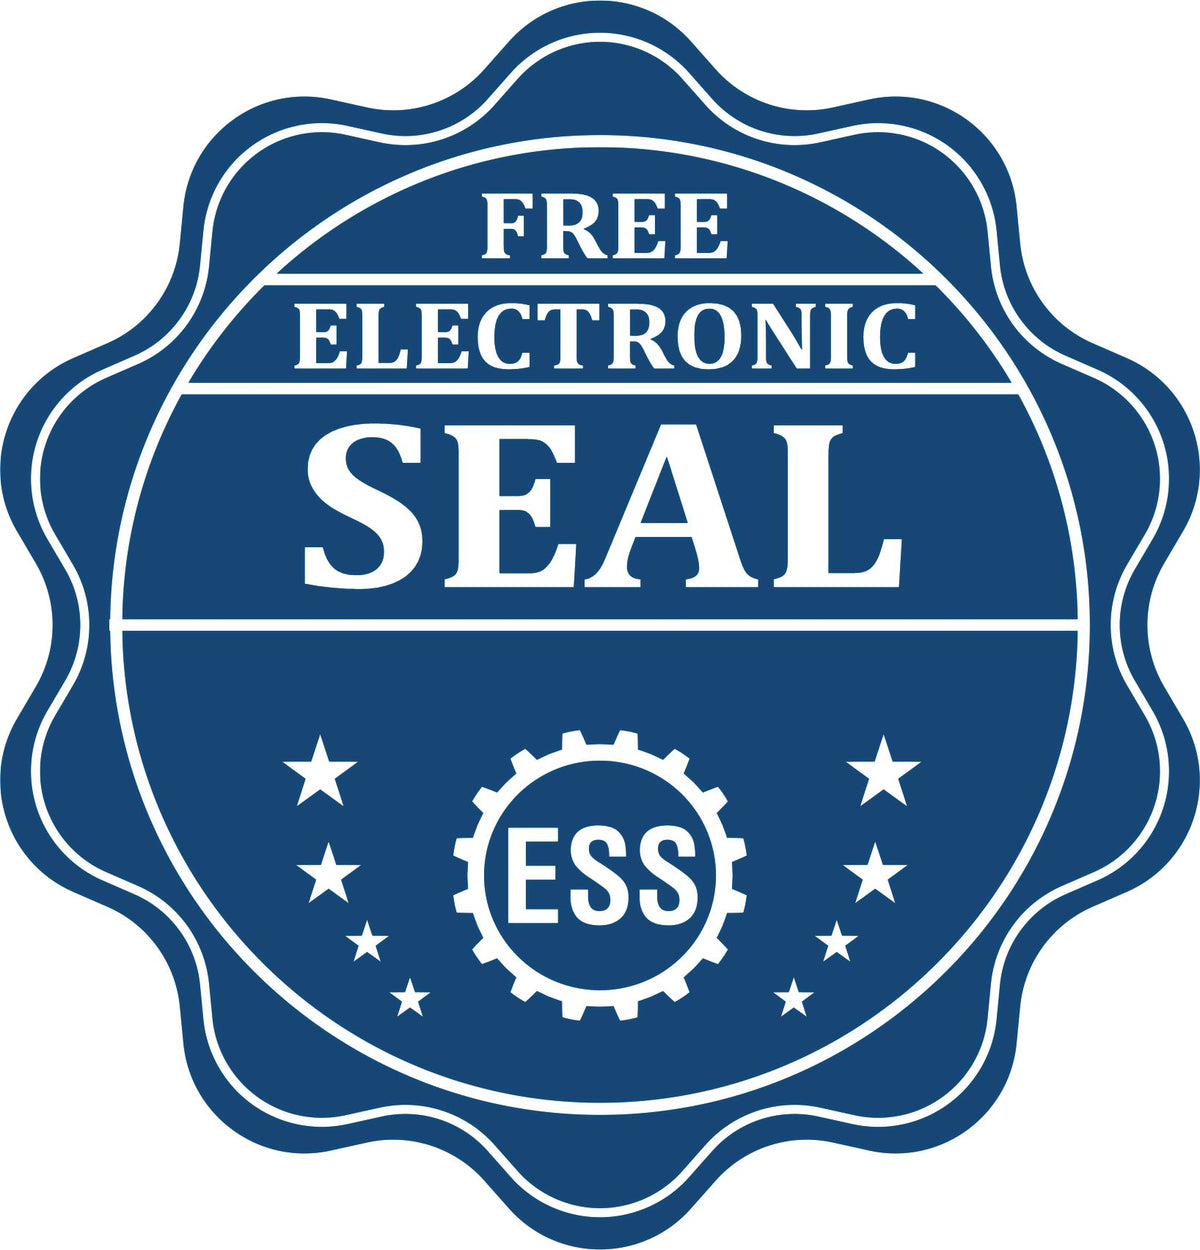 A badge showing a free electronic seal for the Handheld Florida Professional Geologist Embosser with stars and the ESS gear on the emblem.